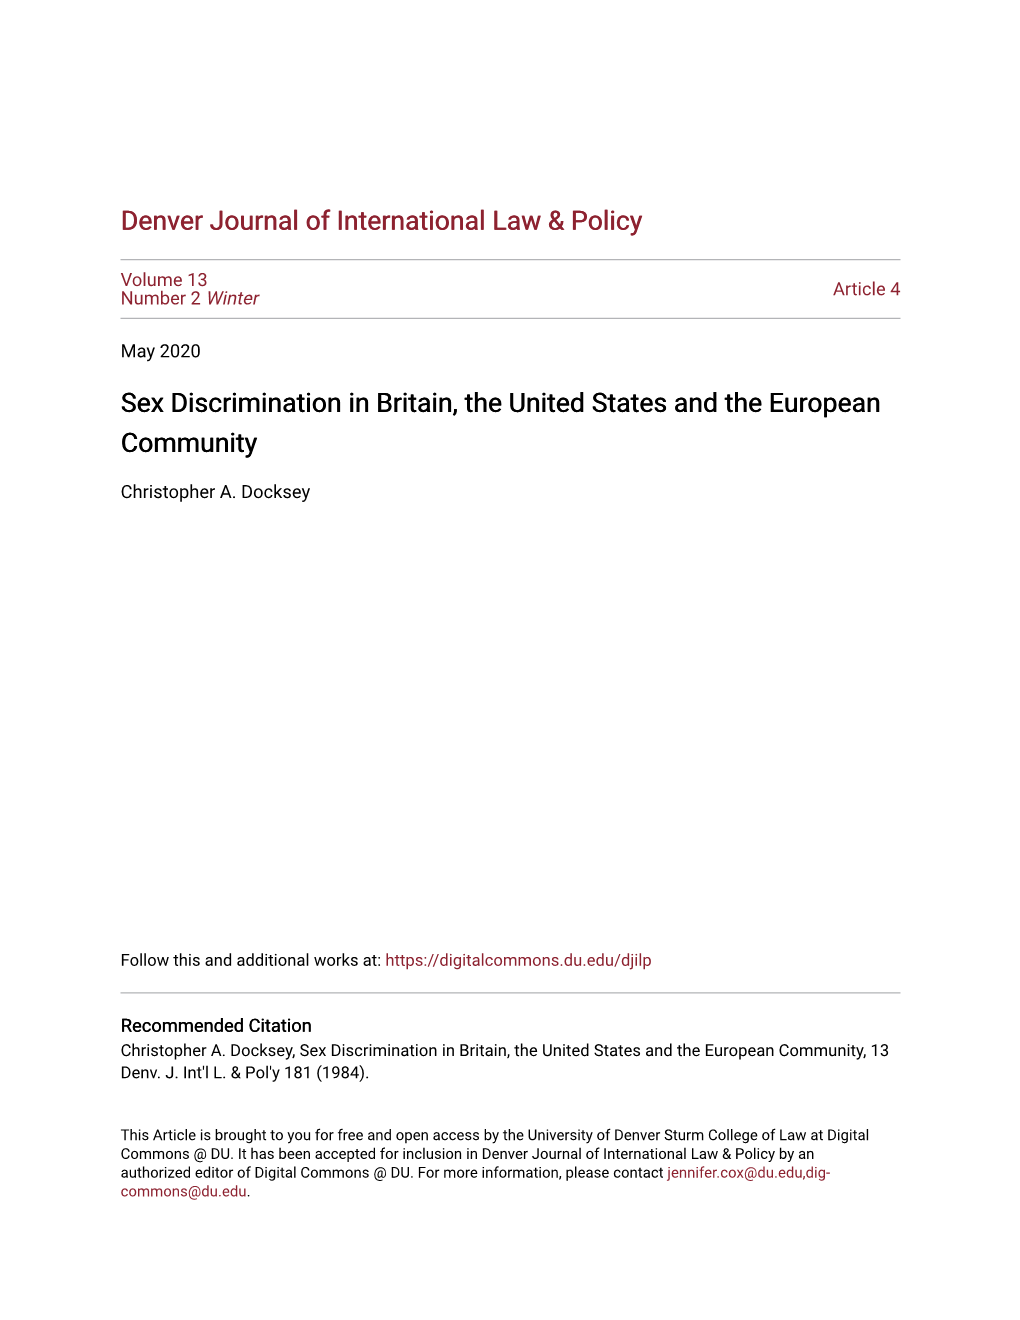 Sex Discrimination in Britain, the United States and the European Community